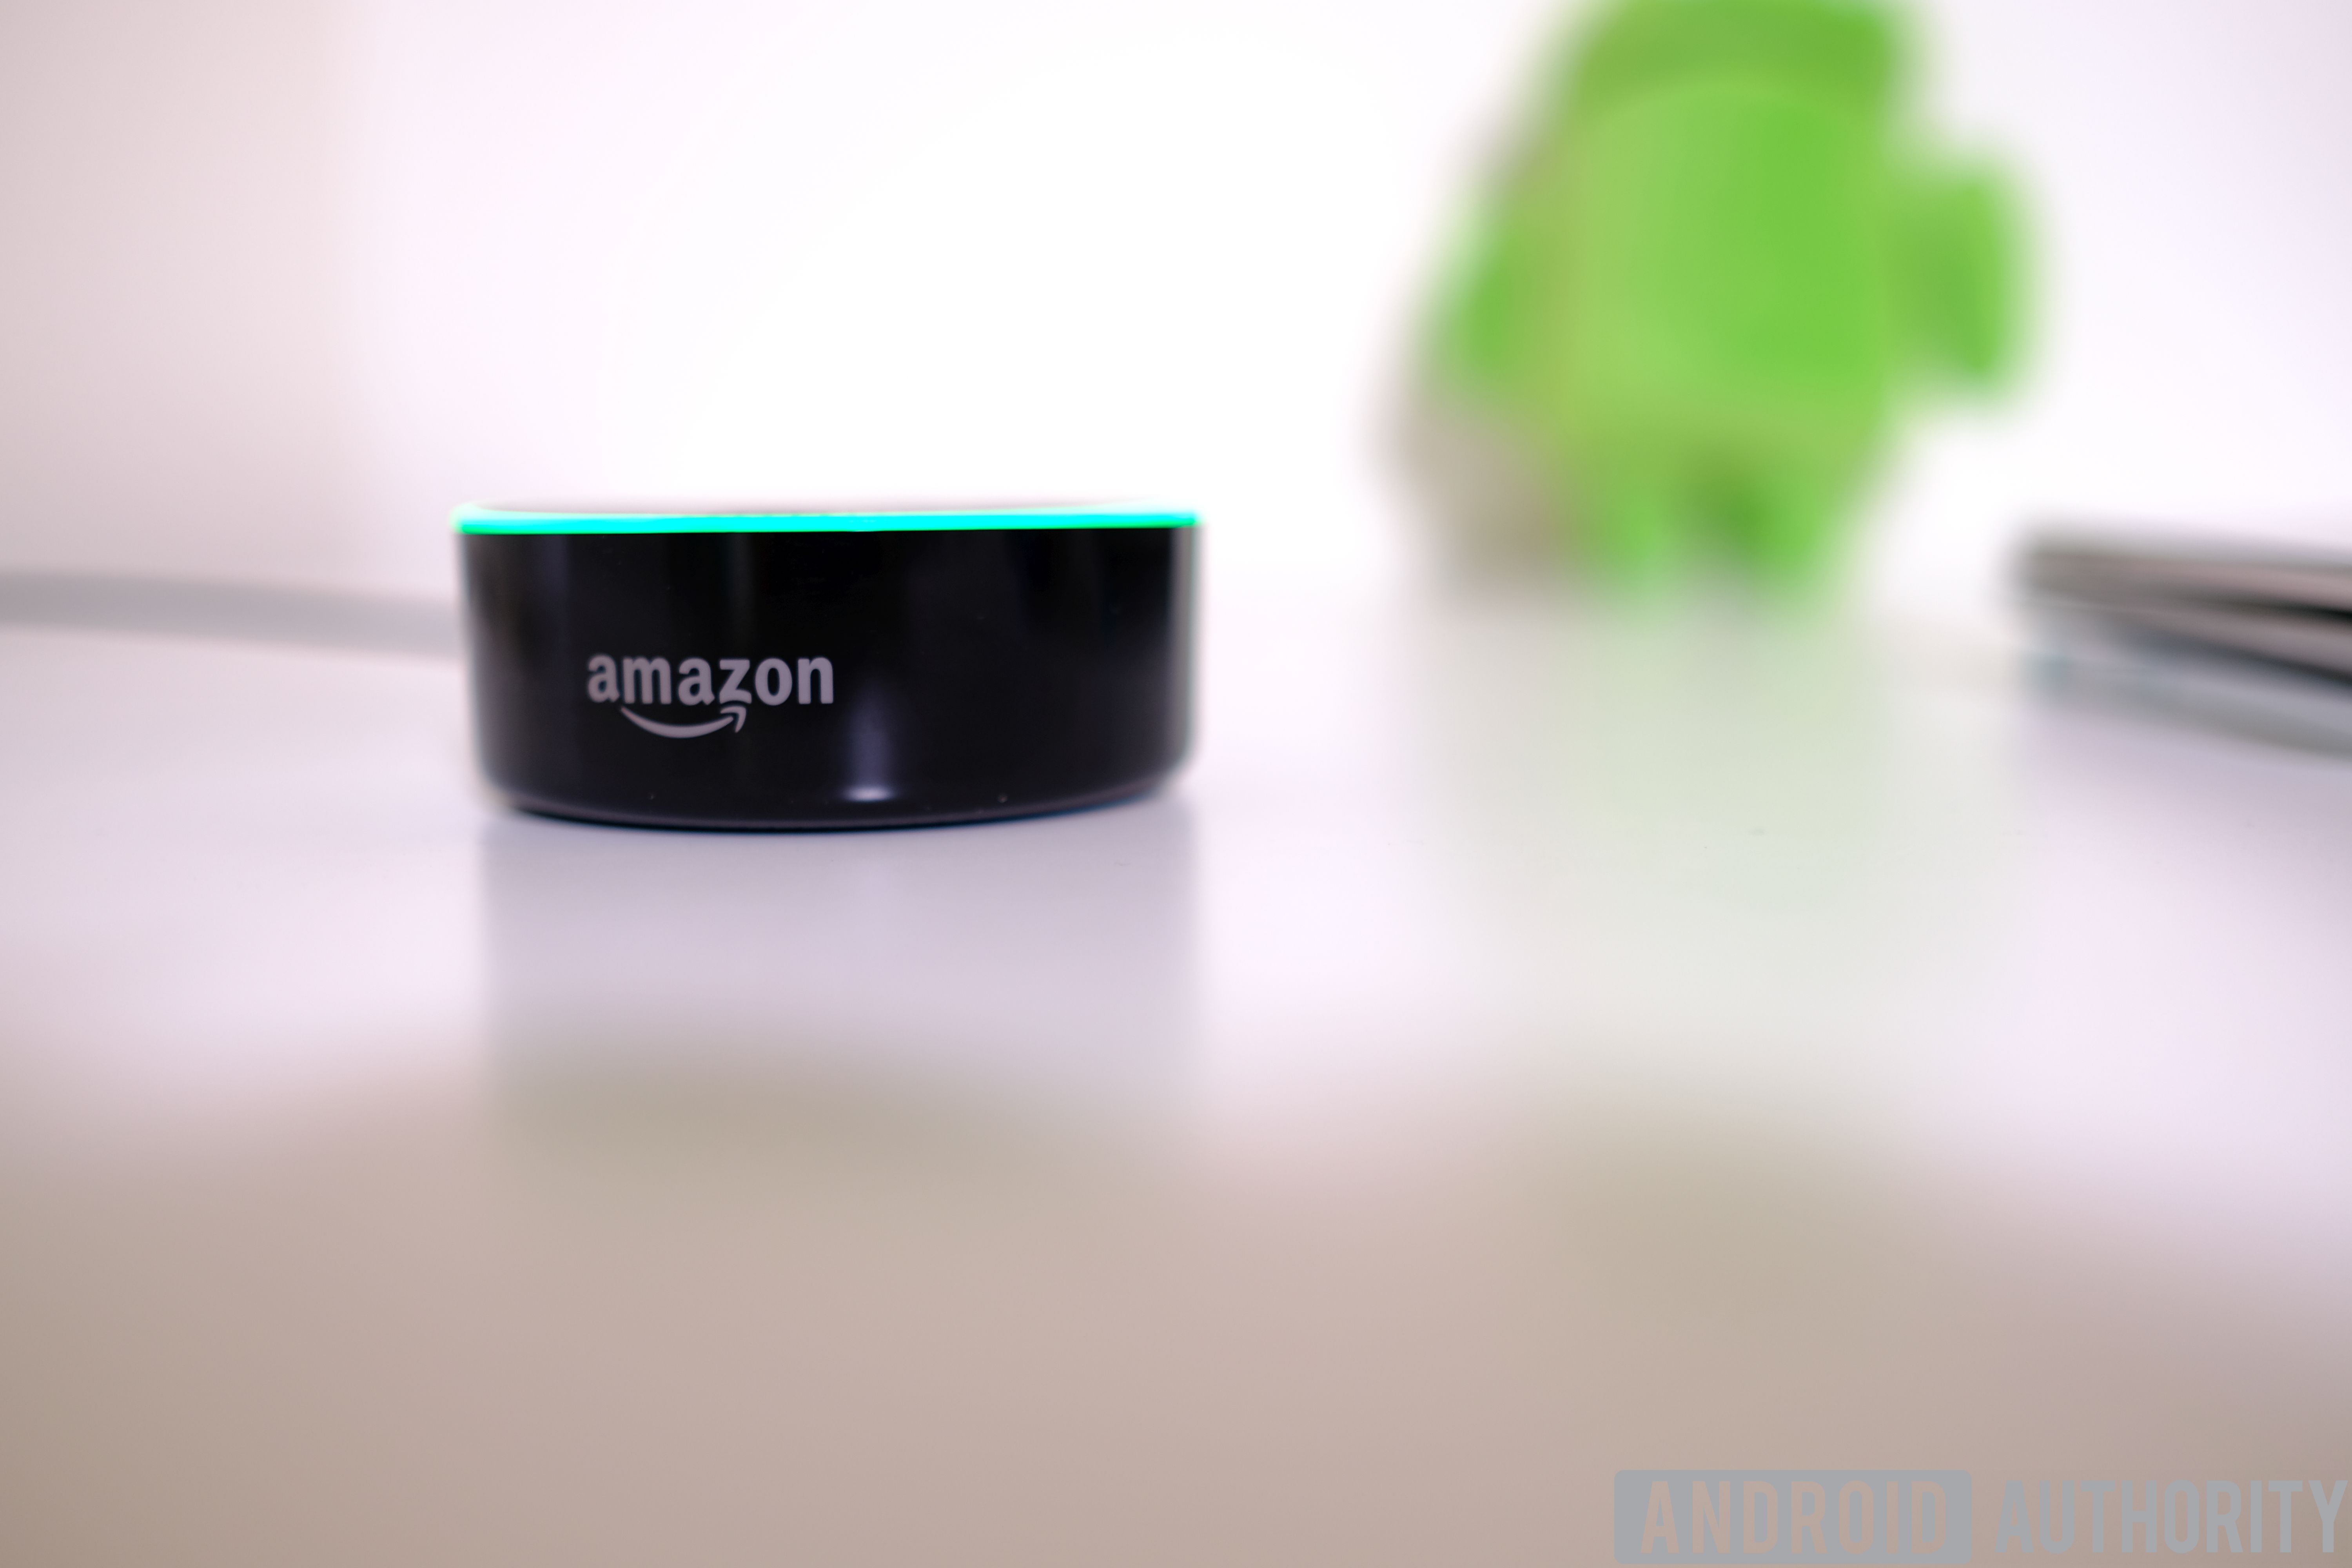 Amazon Echo Dot image on white surface with Android figurine in background.